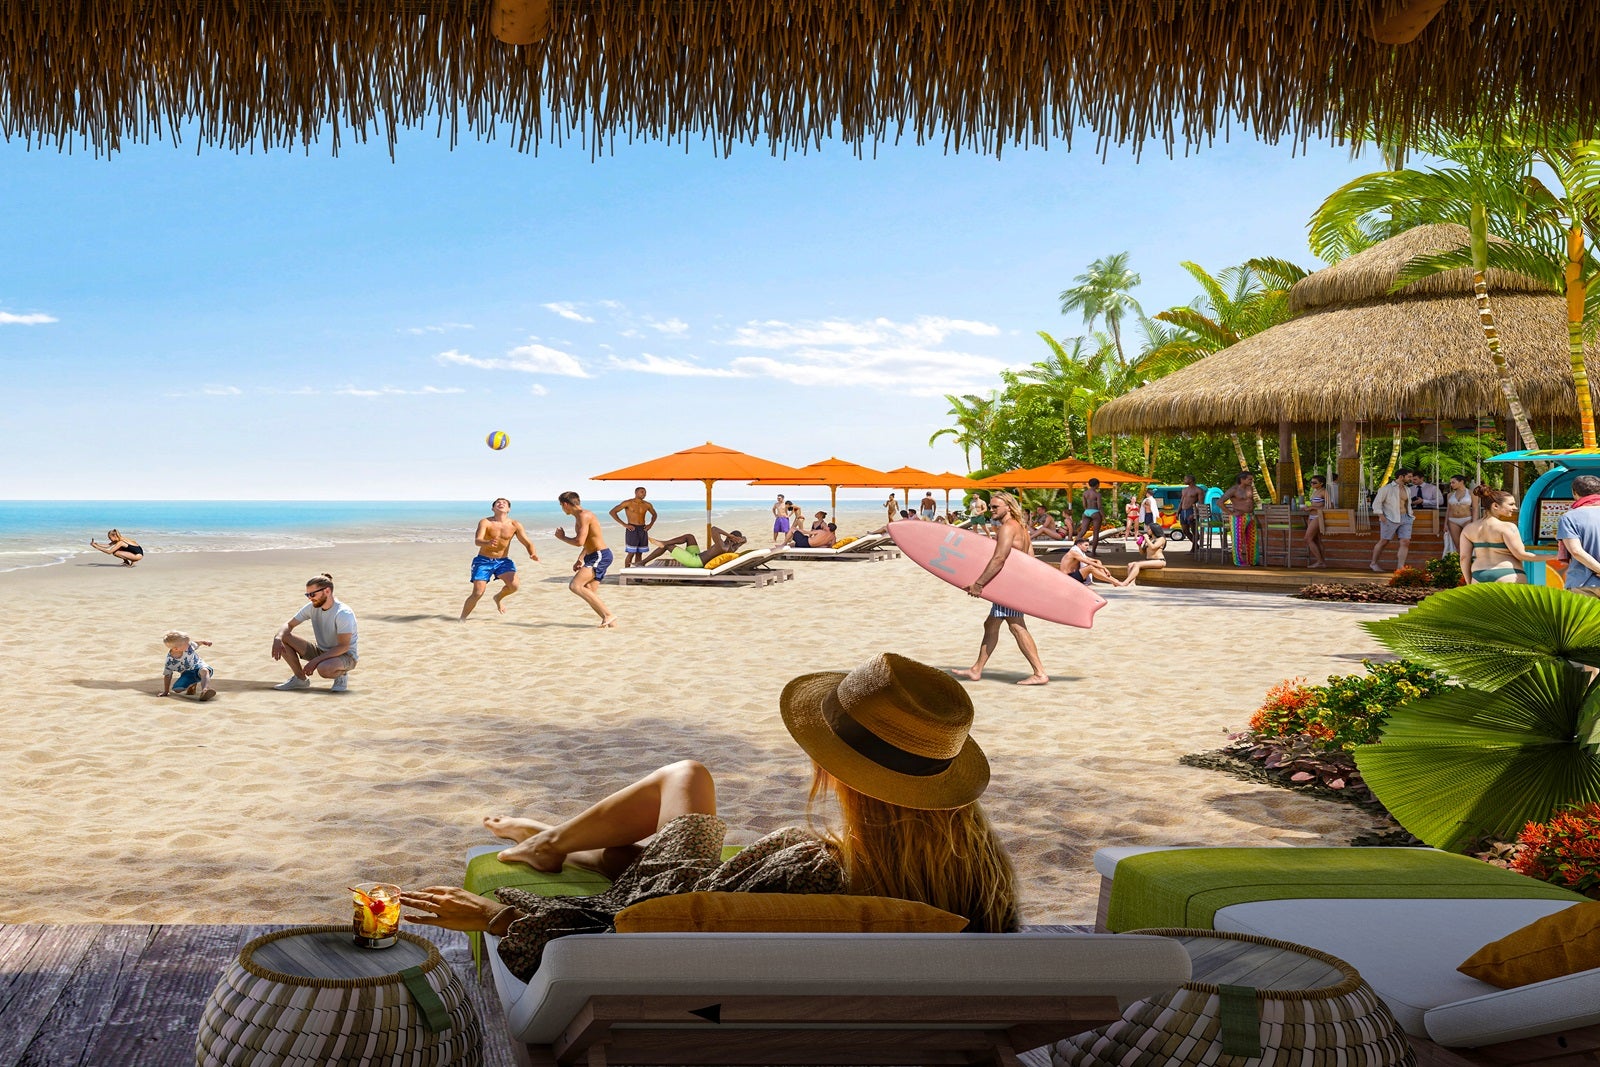 Where will Royal Caribbean build its next beach club for cruisers? We just found out